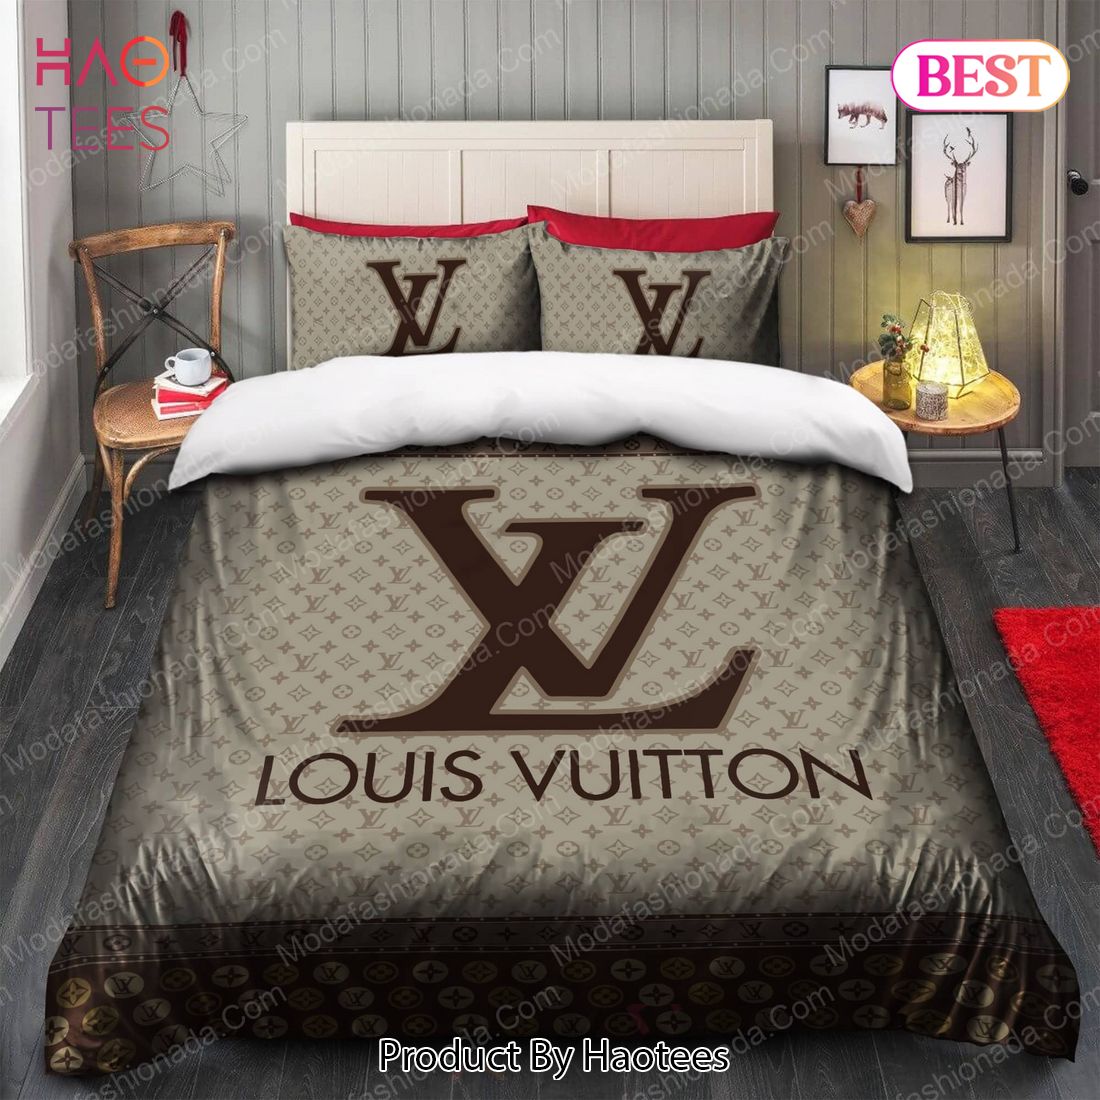 louis vuitton bed sets queen with comforter and sheets